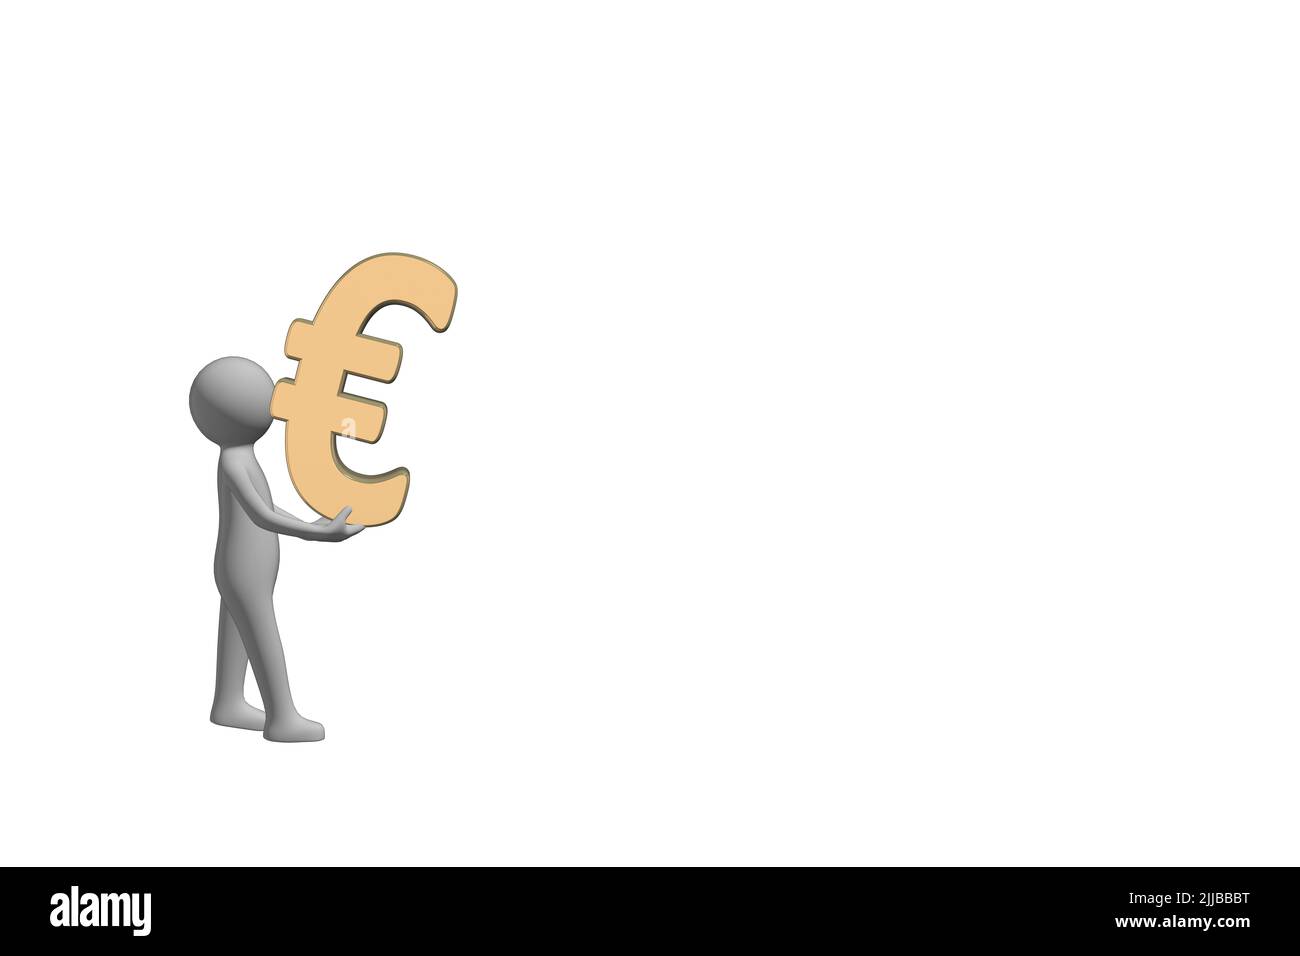 man carrying money concept 3D figure carrying a 3D gold metal euro currency symbol sign cut out isolated on white background Stock Photo